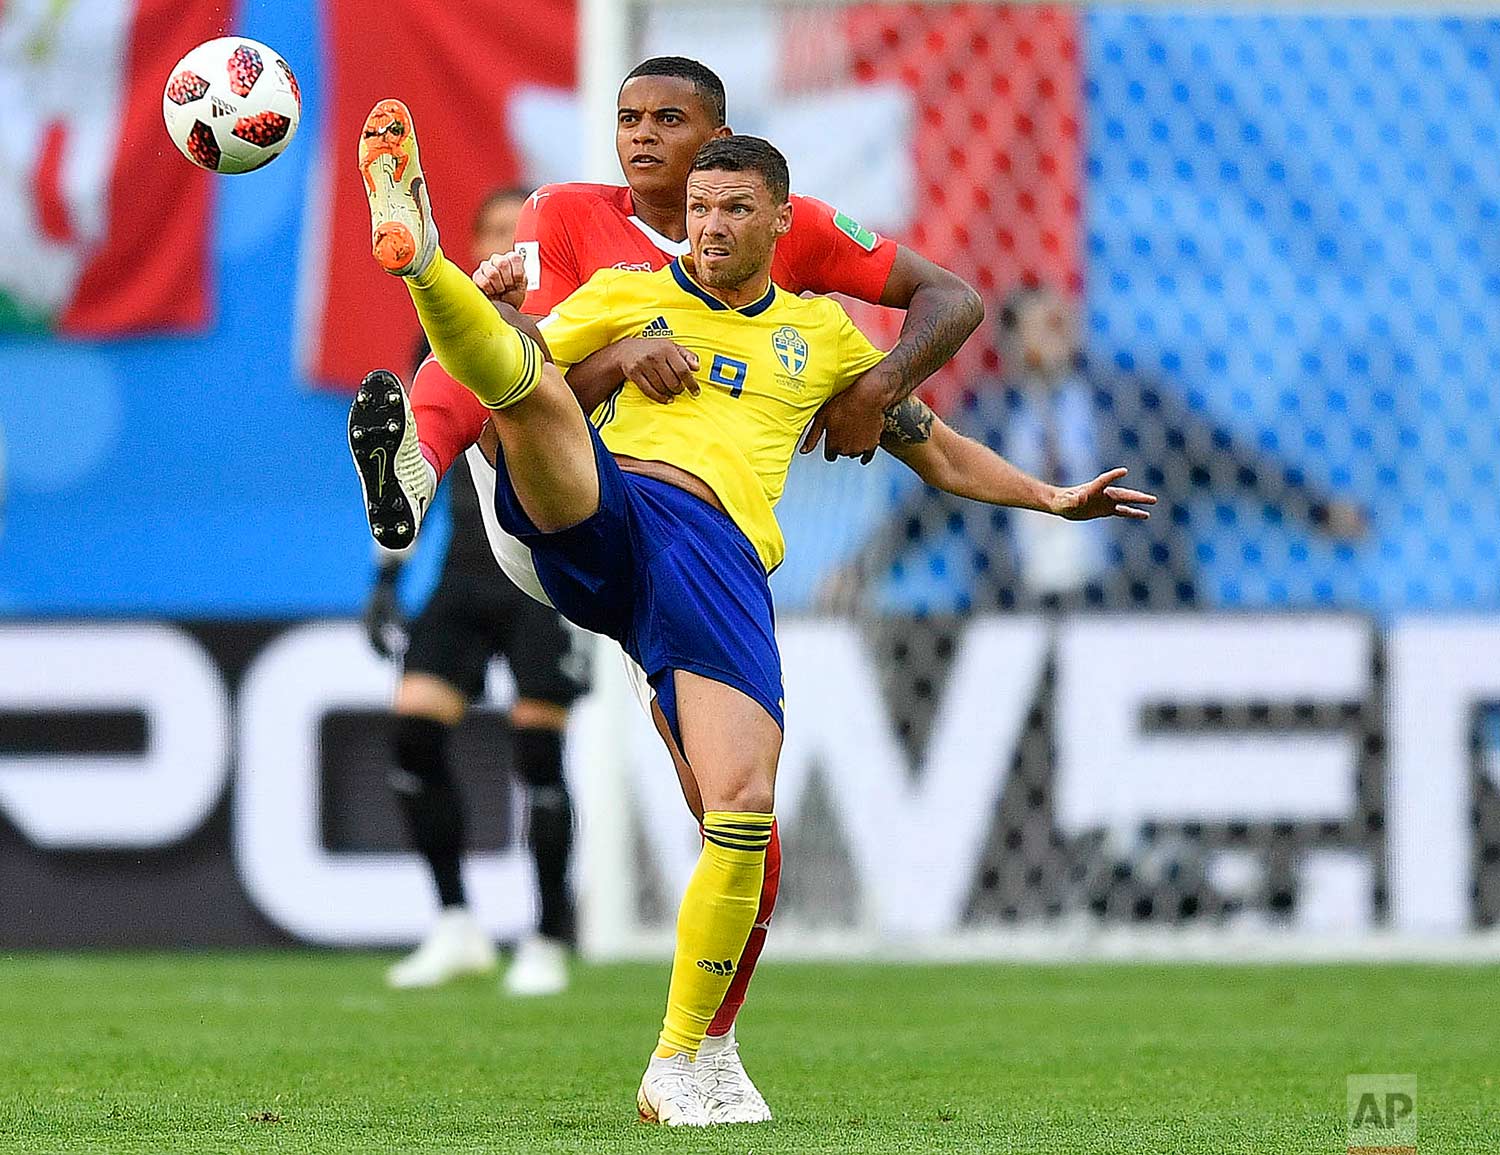  Switzerland's Manuel Akanji, rear, and Sweden's Marcus Berg challenge for the ball during the round of 16 match between Switzerland and Sweden at the 2018 soccer World Cup in the St. Petersburg Stadium, in St. Petersburg, Russia, Tuesday, July 3, 20